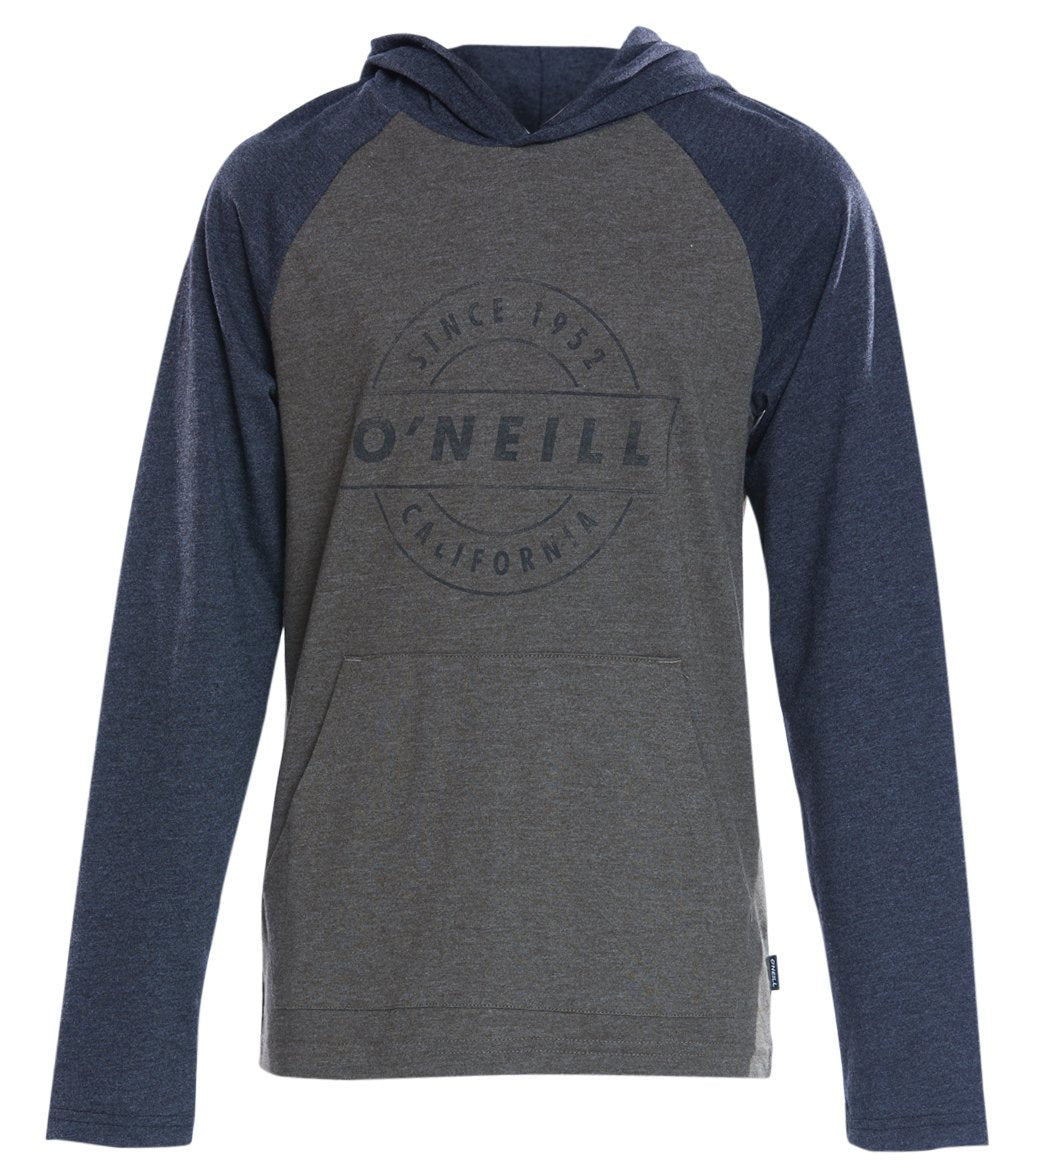 O'neill Boys' Mateo Pullover Hoody Big Kid - Military Green 3T Cotton/Polyester - Swimoutlet.com